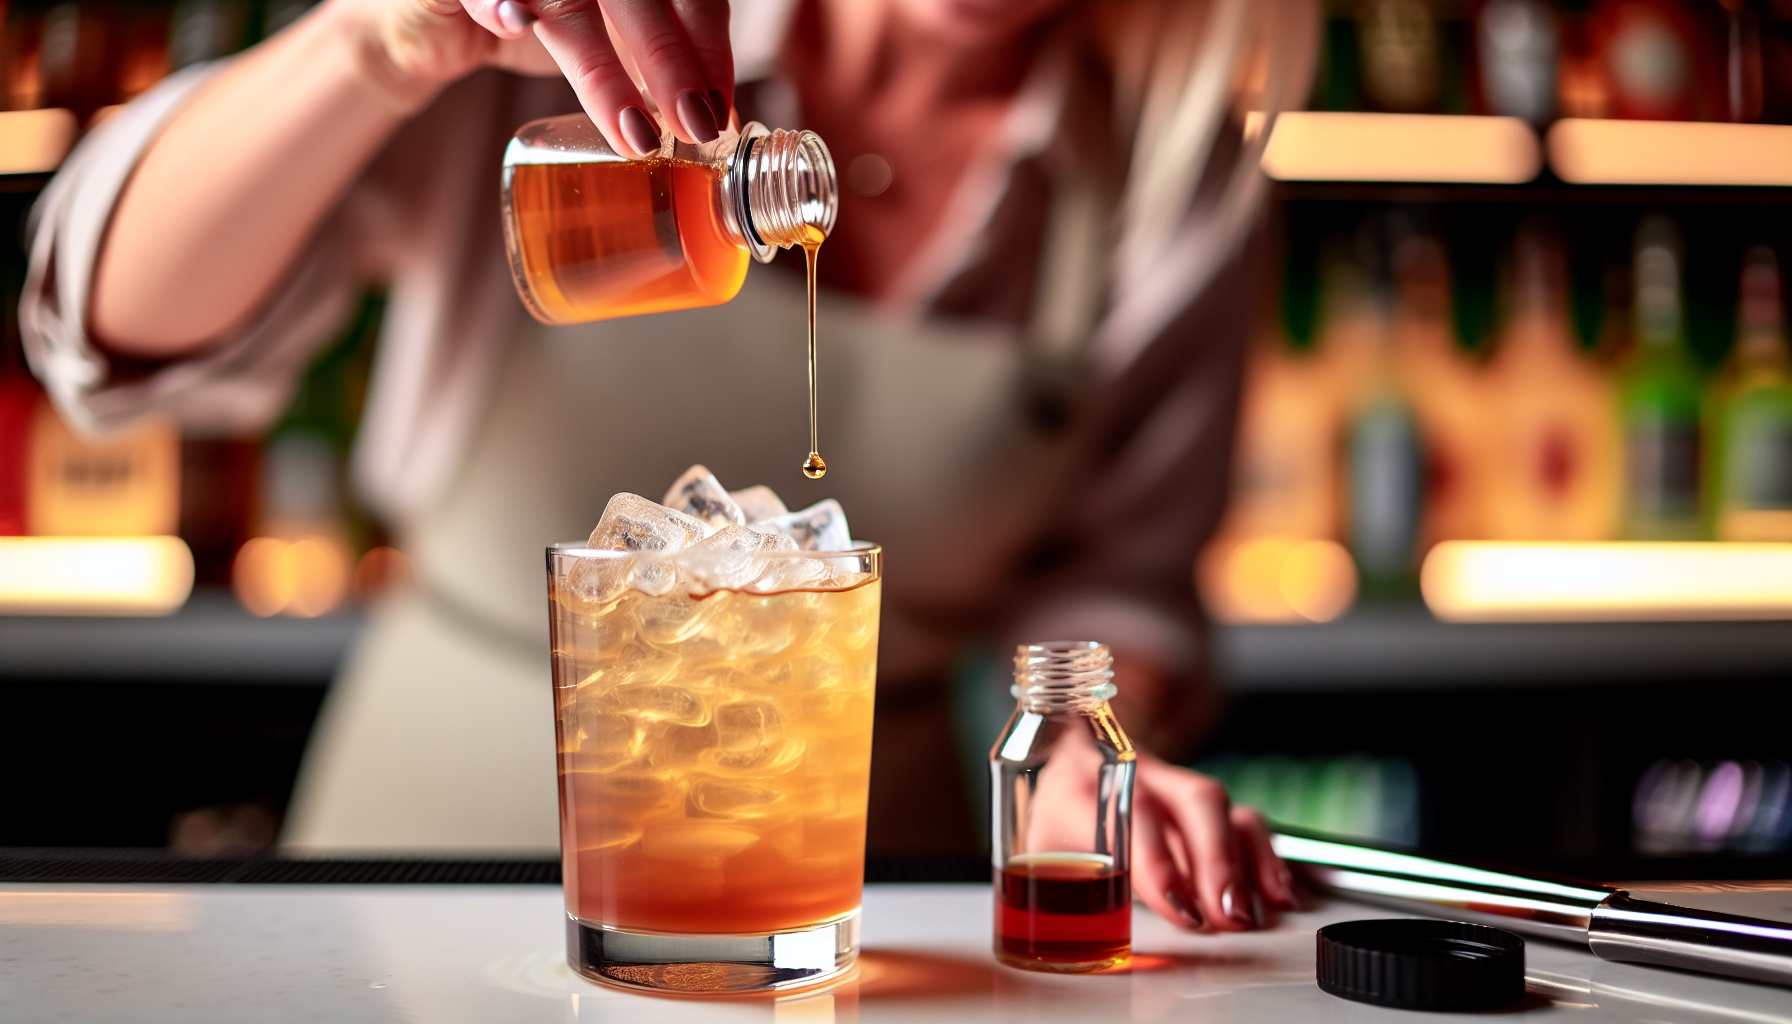 Mixing honey syrup into a refreshing iced tea cocktail